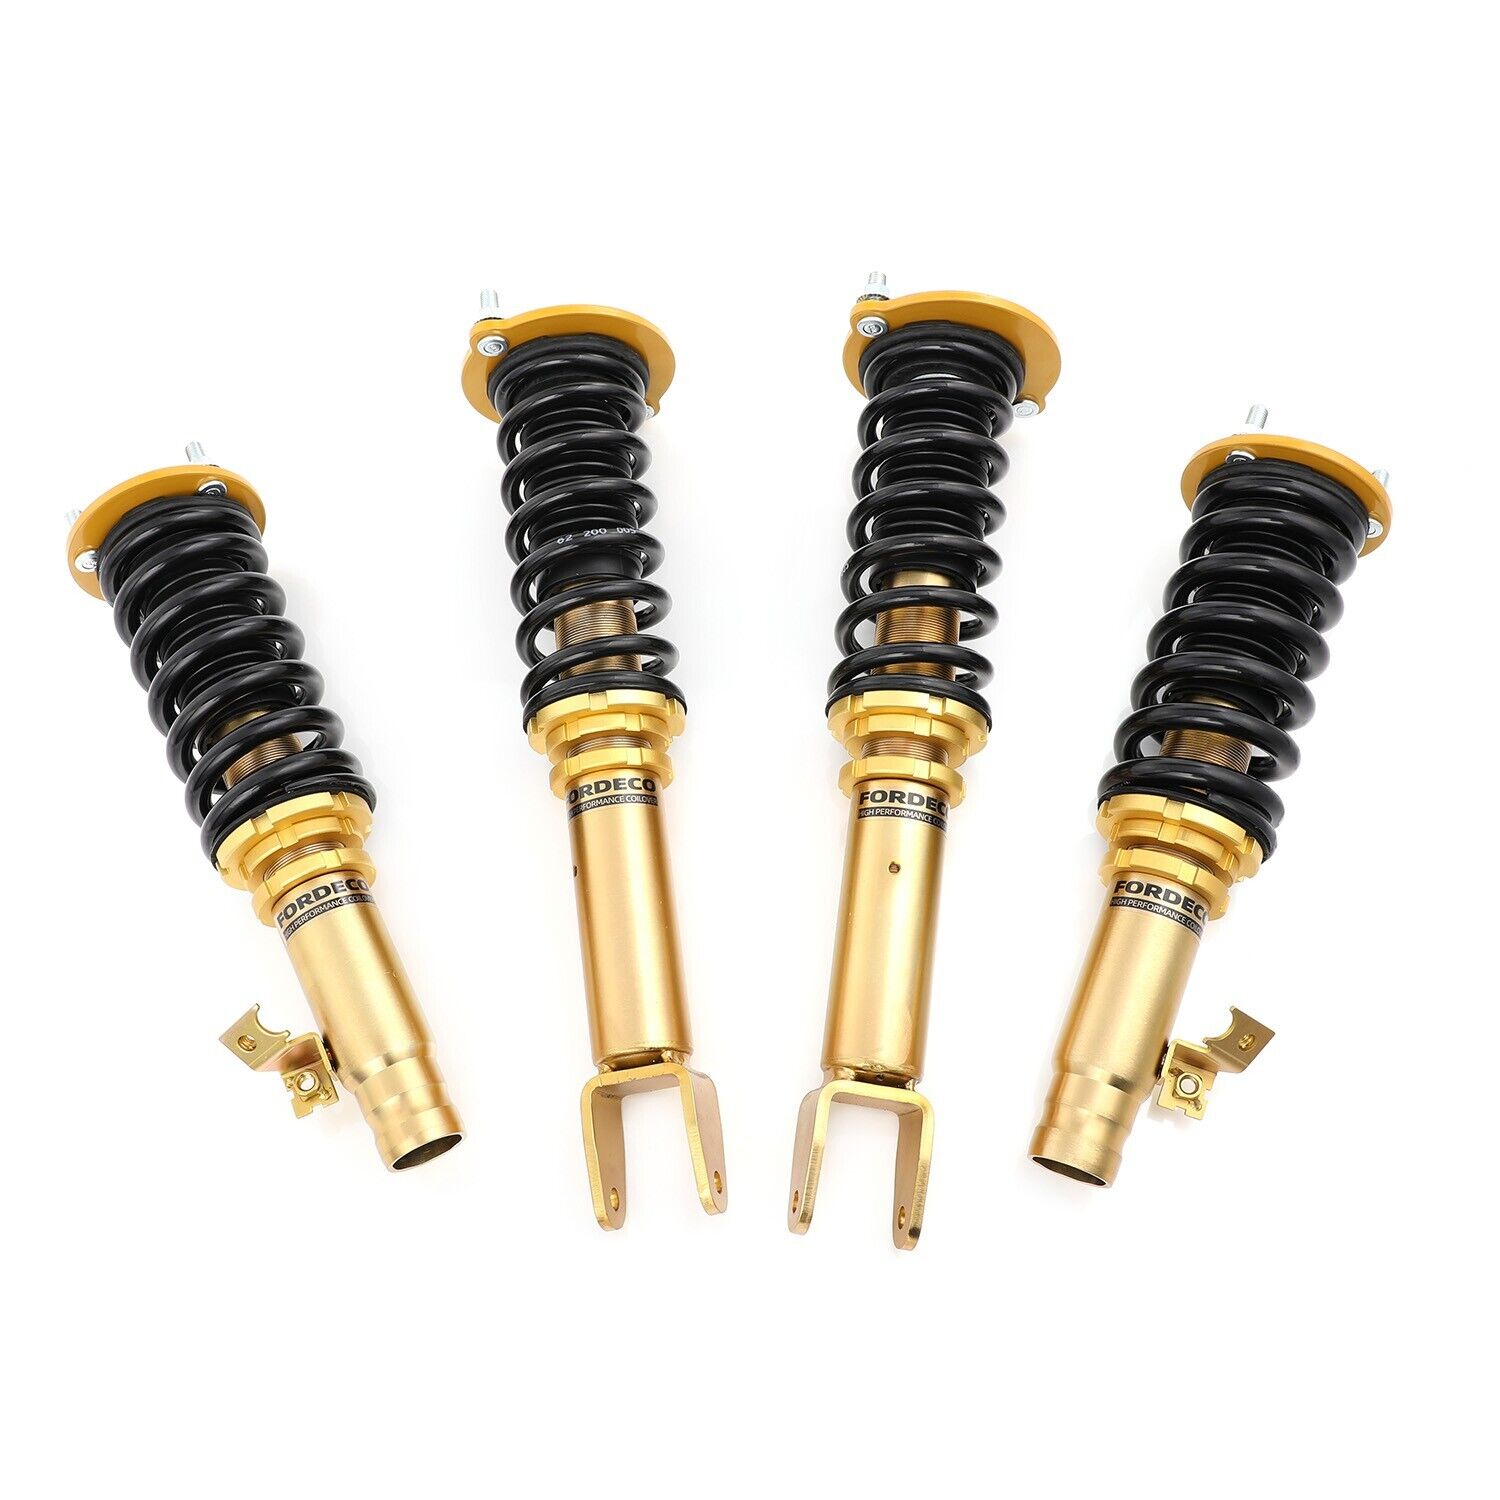 Shock Coilover Suspension Lowering Kits for HONDA ACCORD 90-97 EX/LX/DX/SE